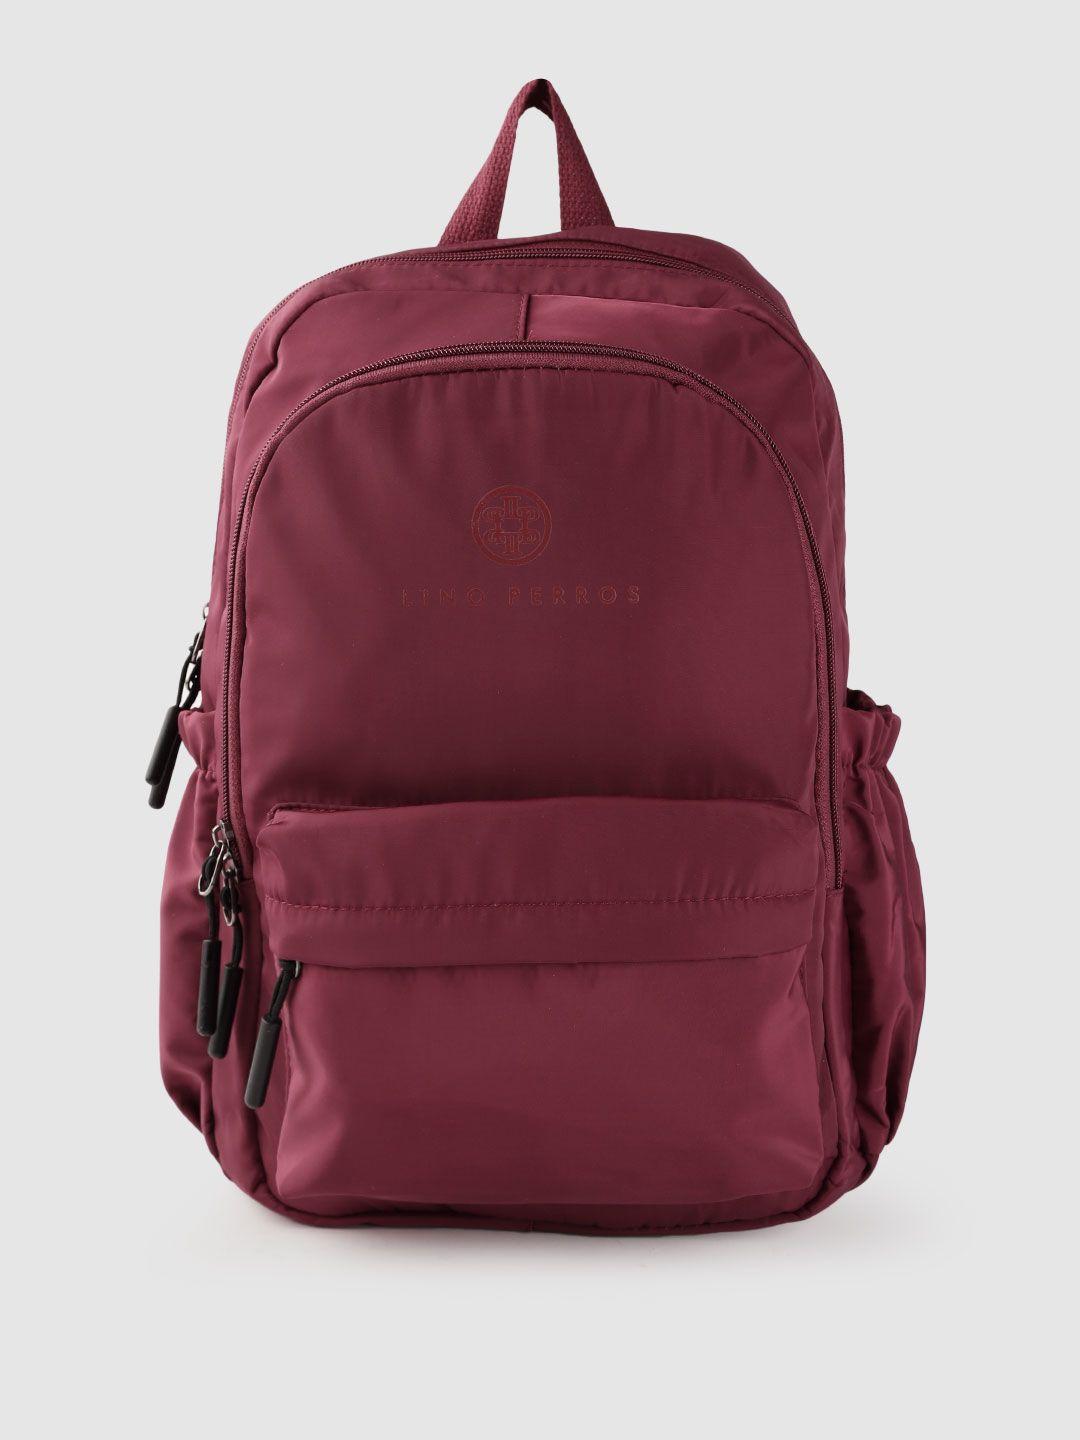 lino perros women maroon solid backpack- 28 litres